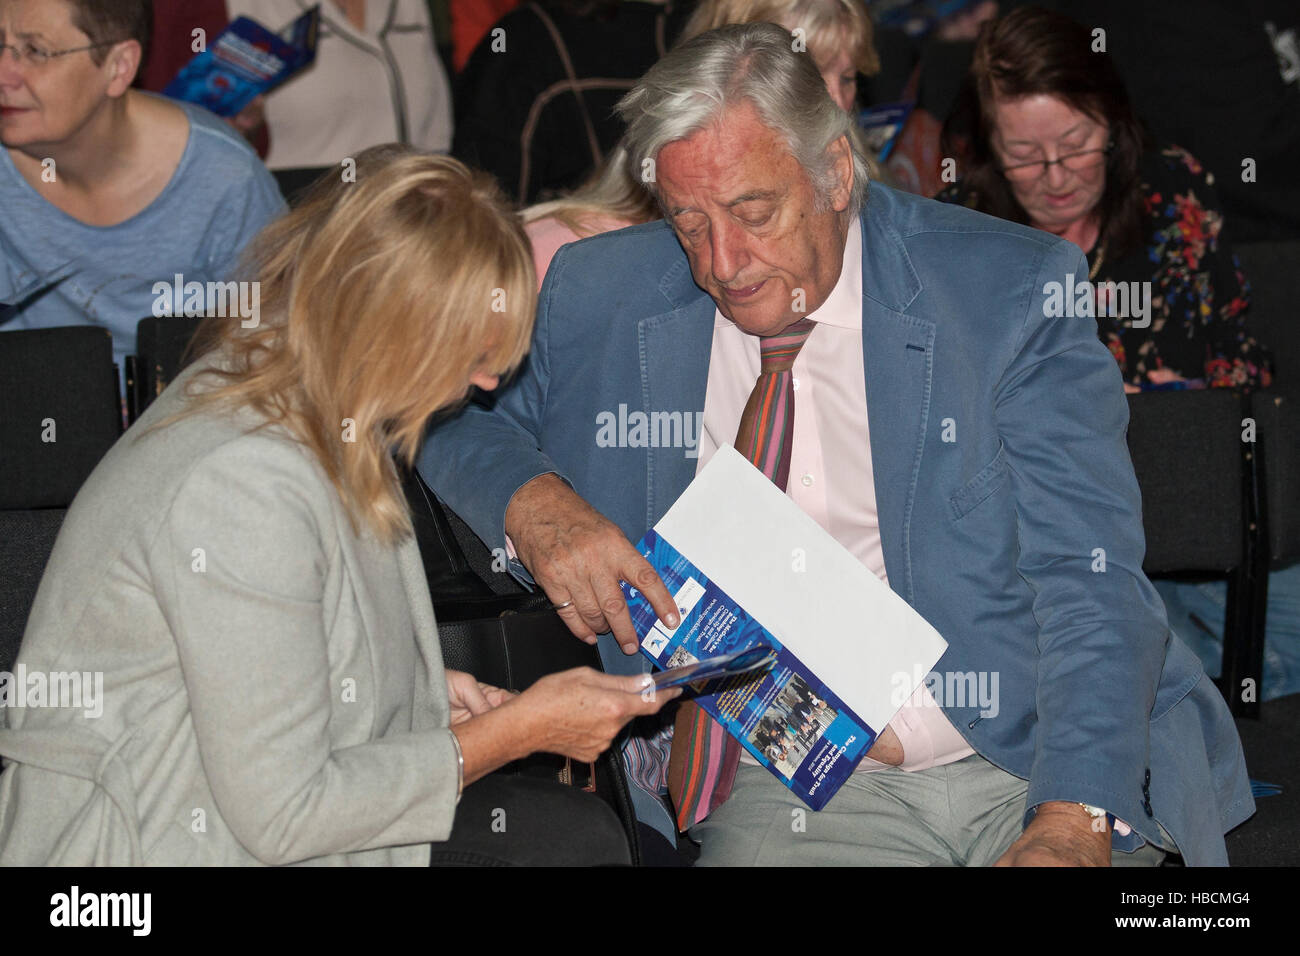 Belfast, UK. 6th December 2016. Barrister Michael Mansfield QC (R) in discussion with a Colleague prior to Mr Mansfield delivered the memorial lecture at St Mary's University College on the Falls Road. He Spoke of new information relating to the 1971 bombing of McGurk's Bar Belfast, UK. Credit:  Bonzo/Alamy Live News Stock Photo